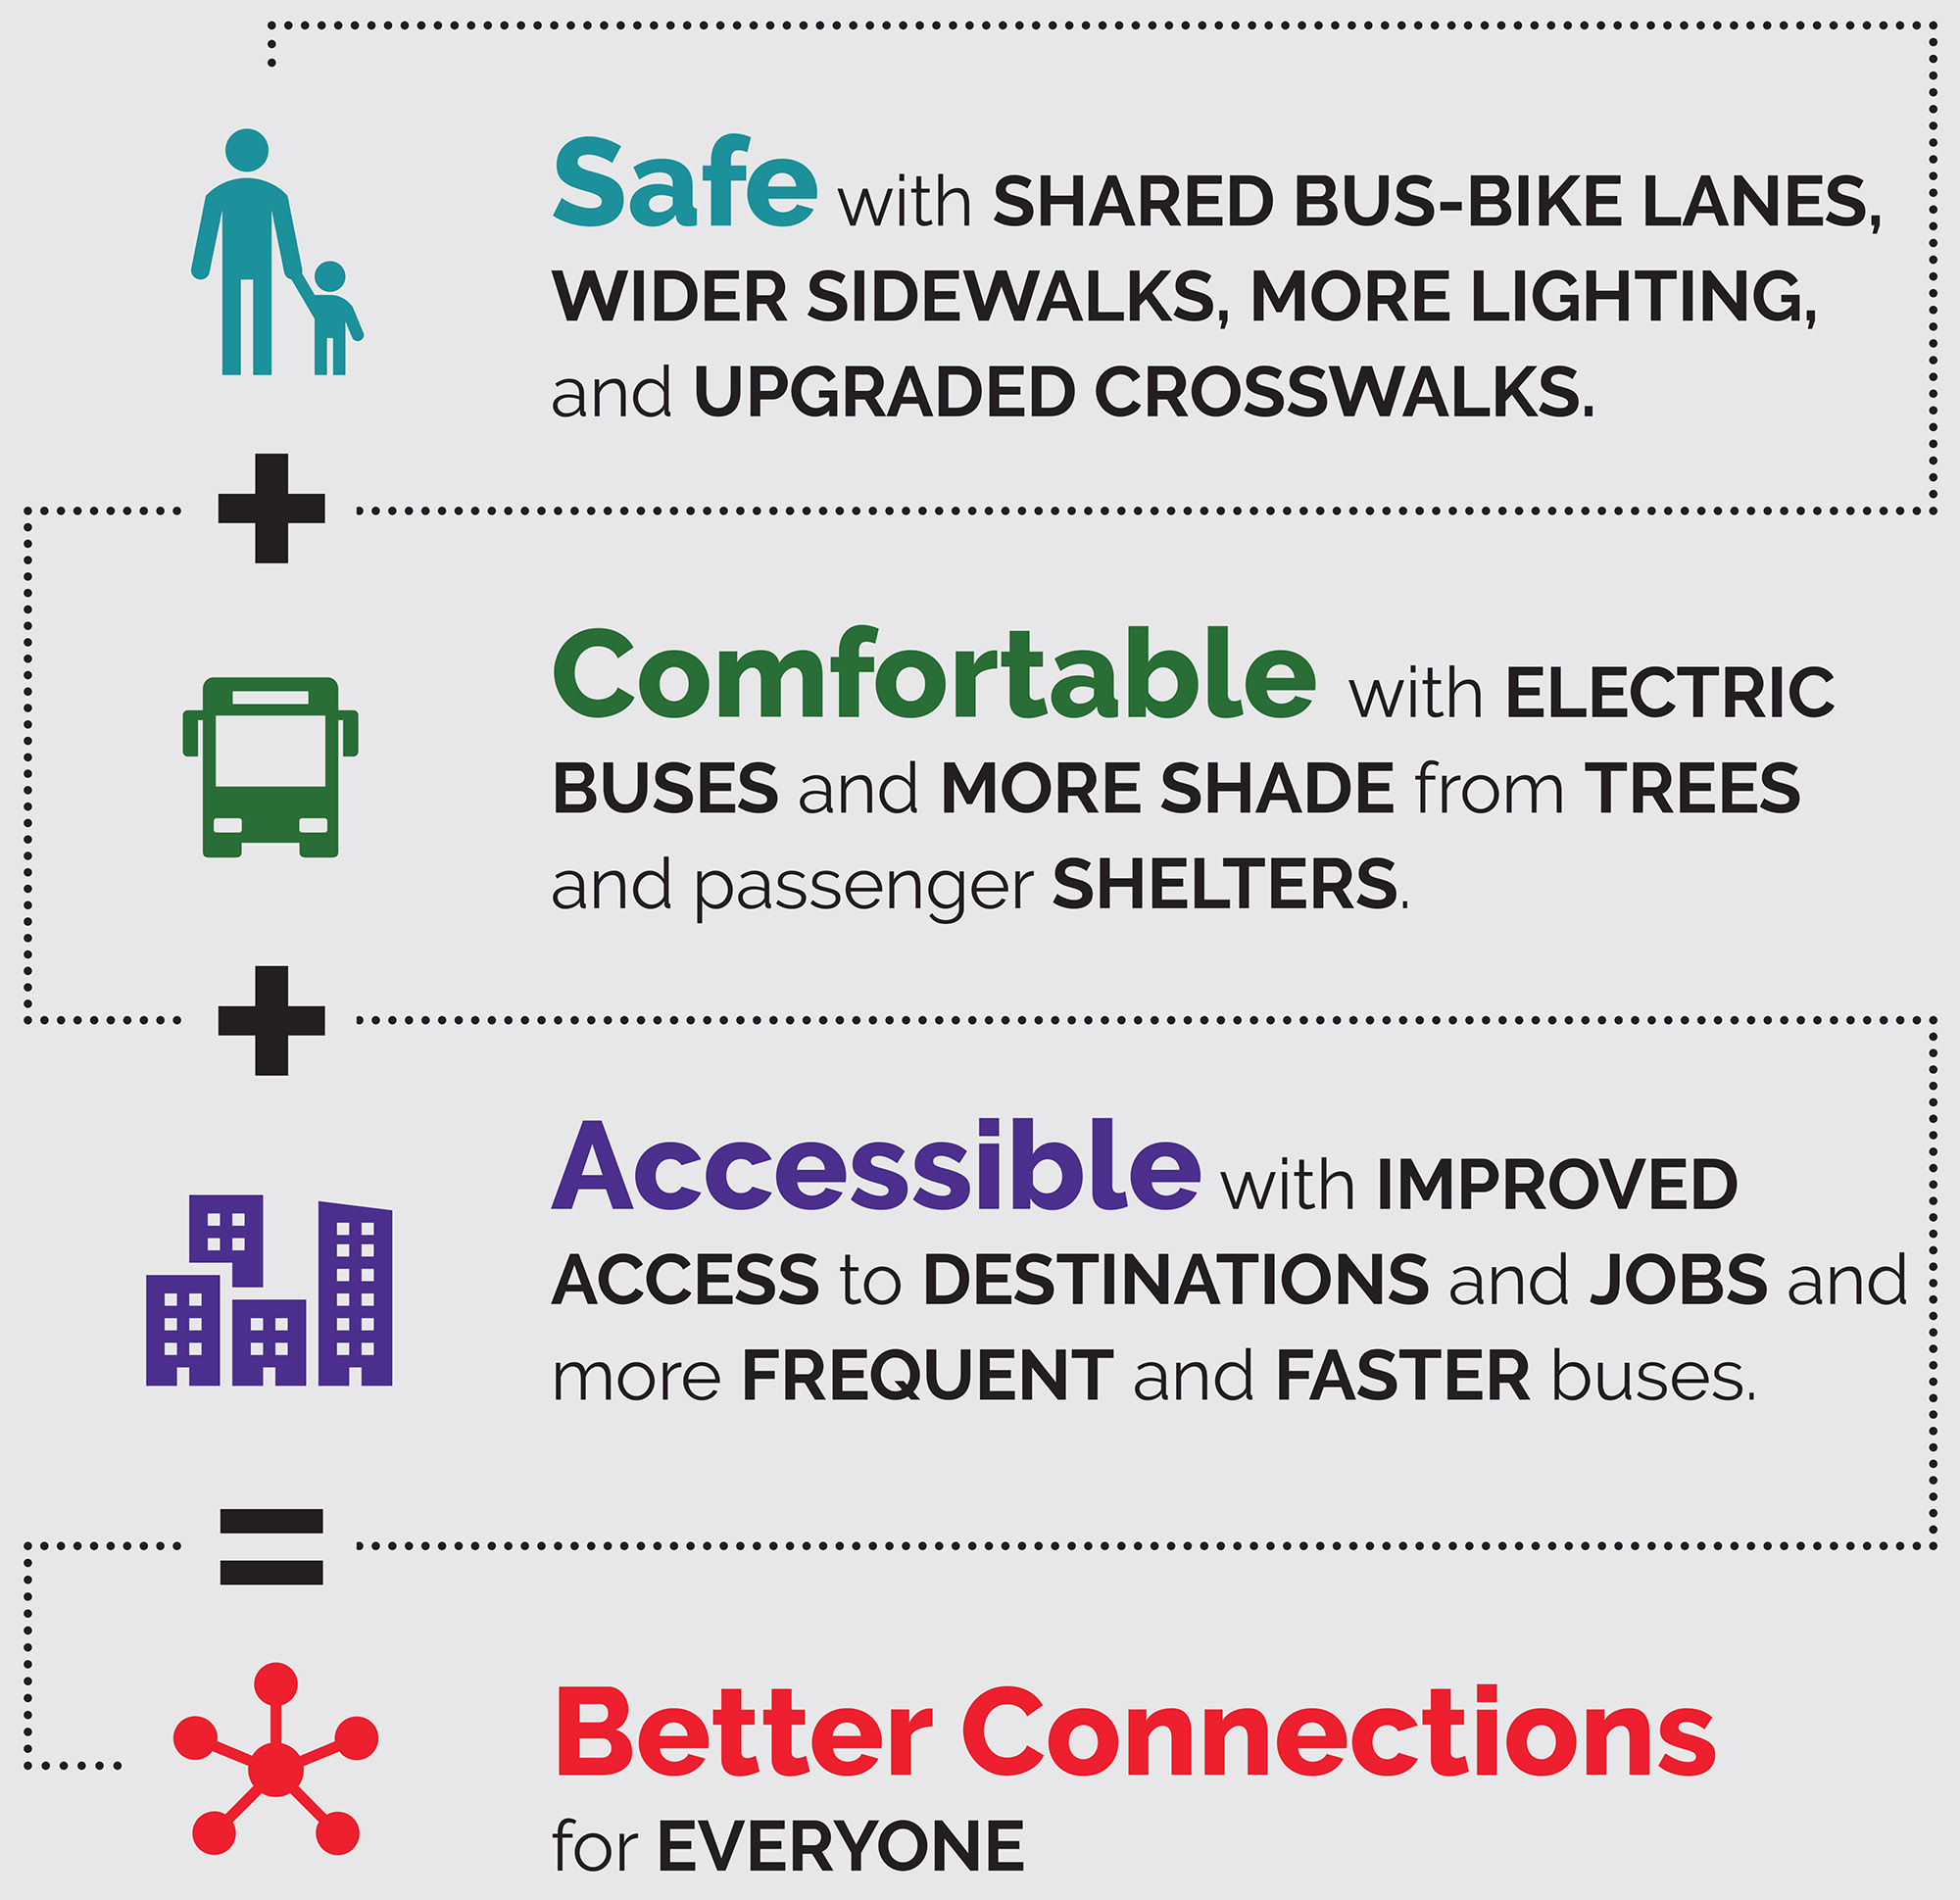 Safe with shared bus-bike lanes, wider sidewalks, more lighting, and upgraded crosswalks. Comfortable with electric buses and more shade from trees and passenger shelters. Accessible with improved access to destinations and jobs and more frequent and faster buses. Better Connections for everyone.